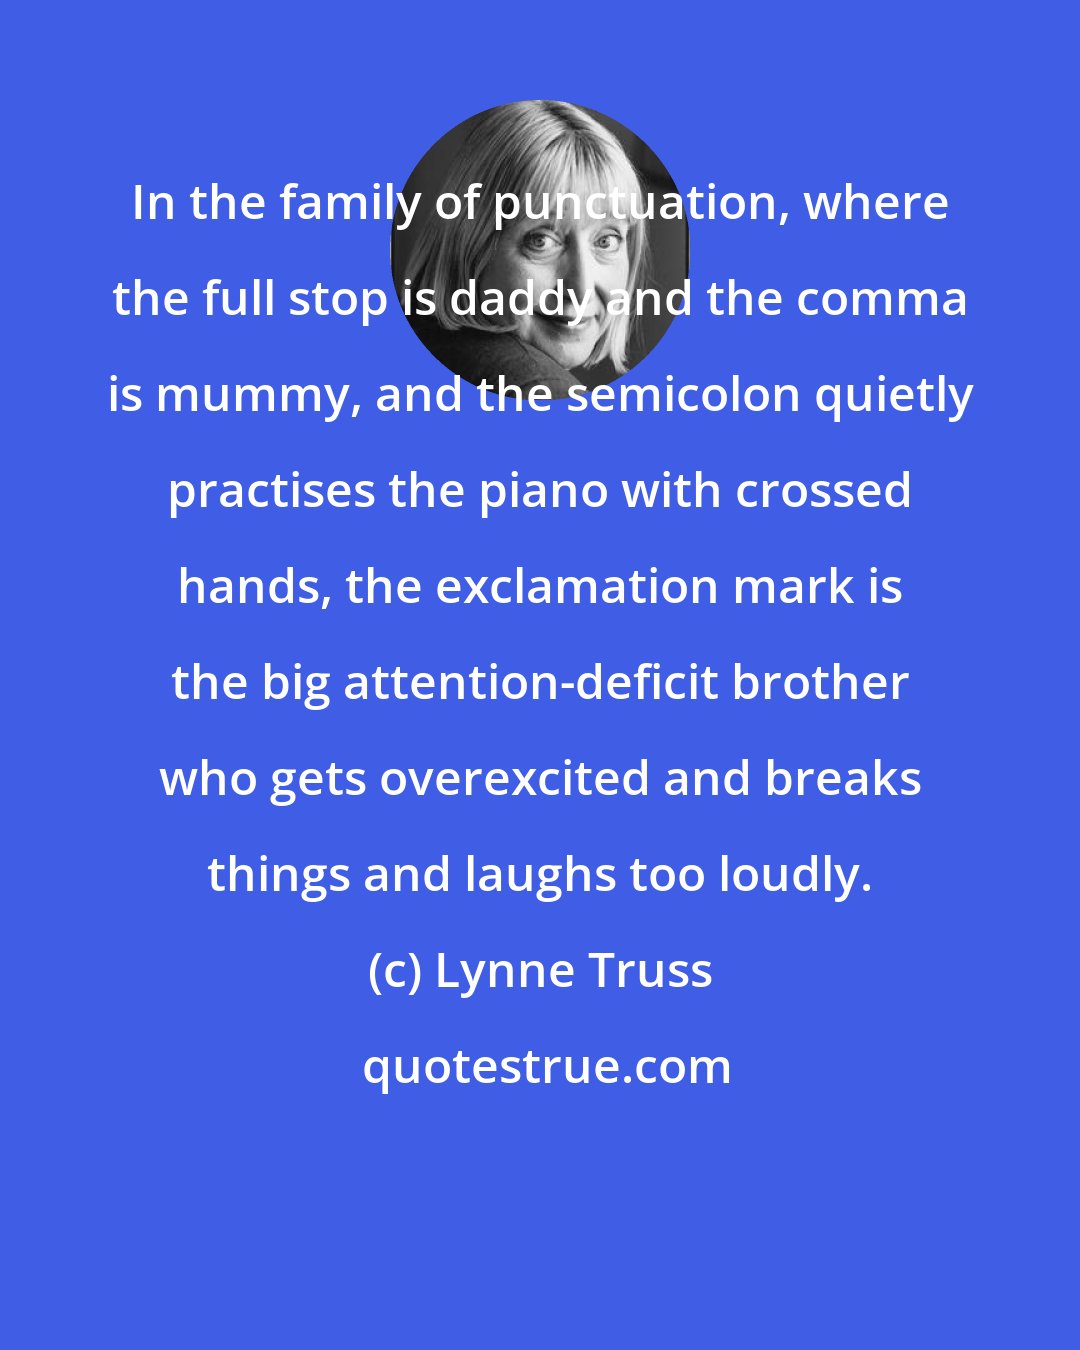 Lynne Truss: In the family of punctuation, where the full stop is daddy and the comma is mummy, and the semicolon quietly practises the piano with crossed hands, the exclamation mark is the big attention-deficit brother who gets overexcited and breaks things and laughs too loudly.